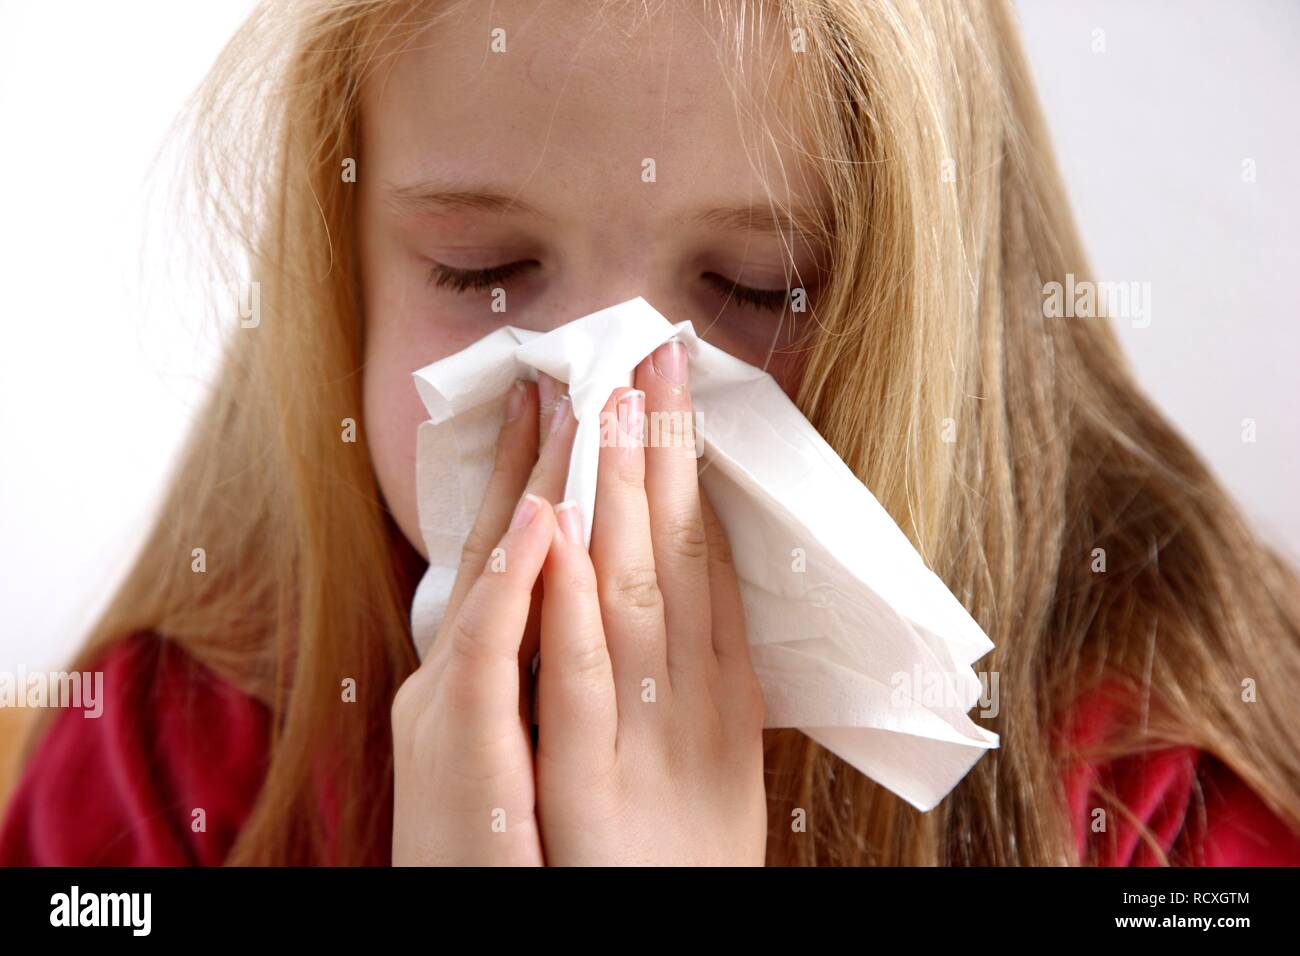 Girl, 10 years old, with a cold, flu, fever, blowing her nose Stock Photo